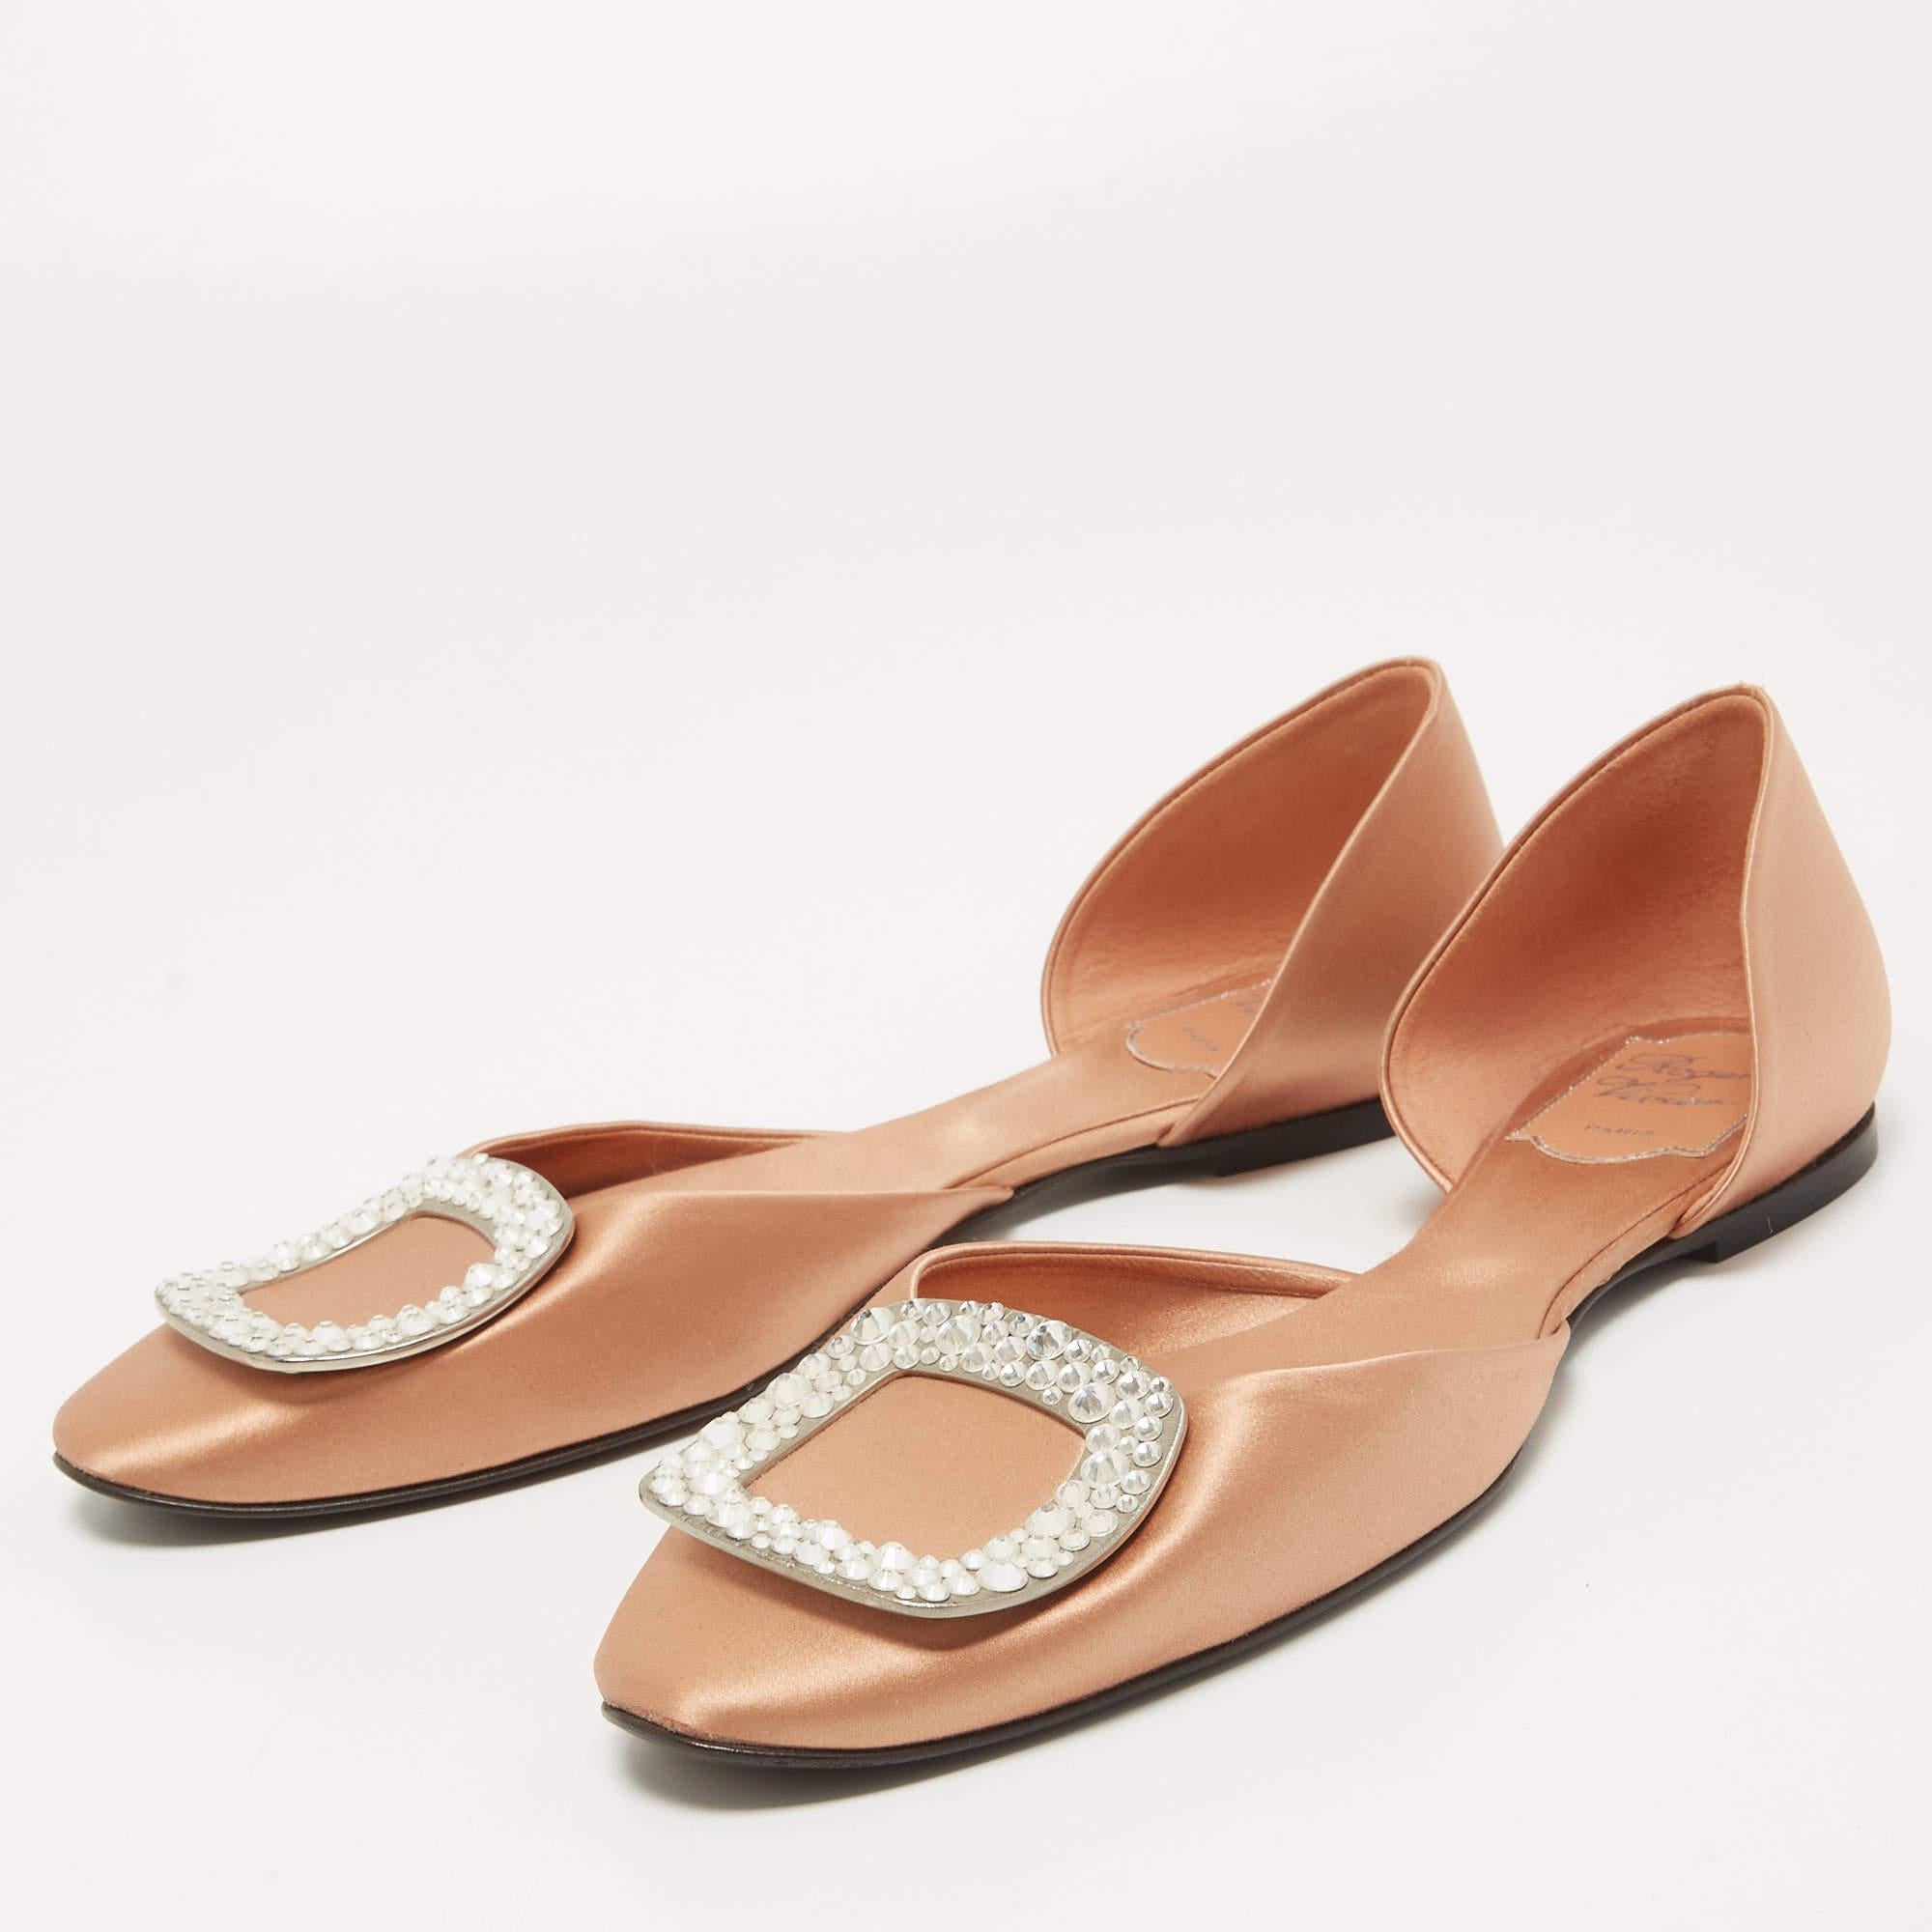 A perfect blend of luxury, style, and comfort. These designer flats are made using prime quality materials and frame your feet in the most elegant way. They can be paired with a host of outfits from your wardrobe.

Includes: Original Dustbag